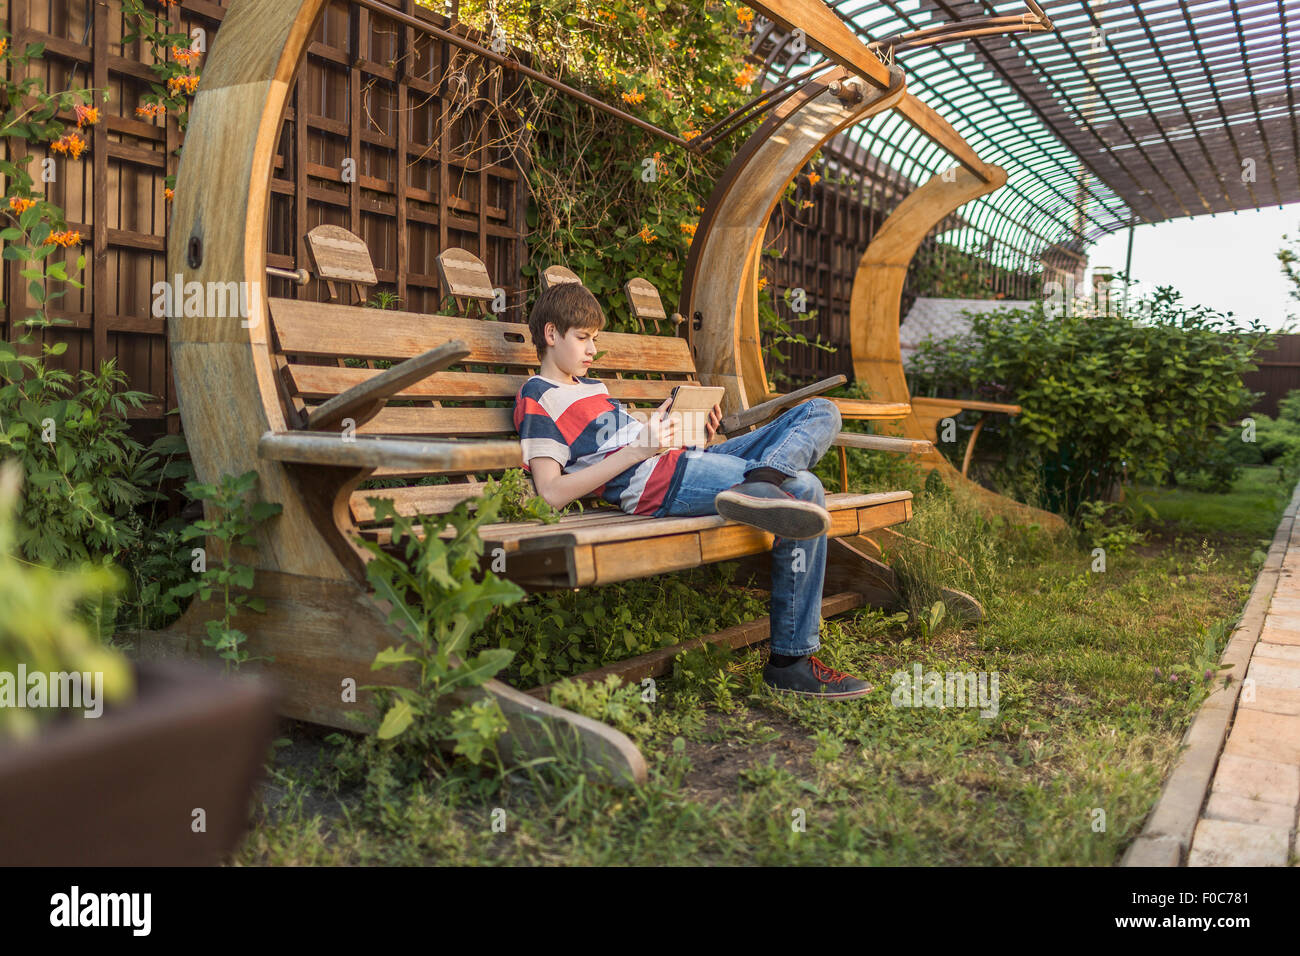 Full length of boy using digital tablet while sitting on bench in backyard Stock Photo